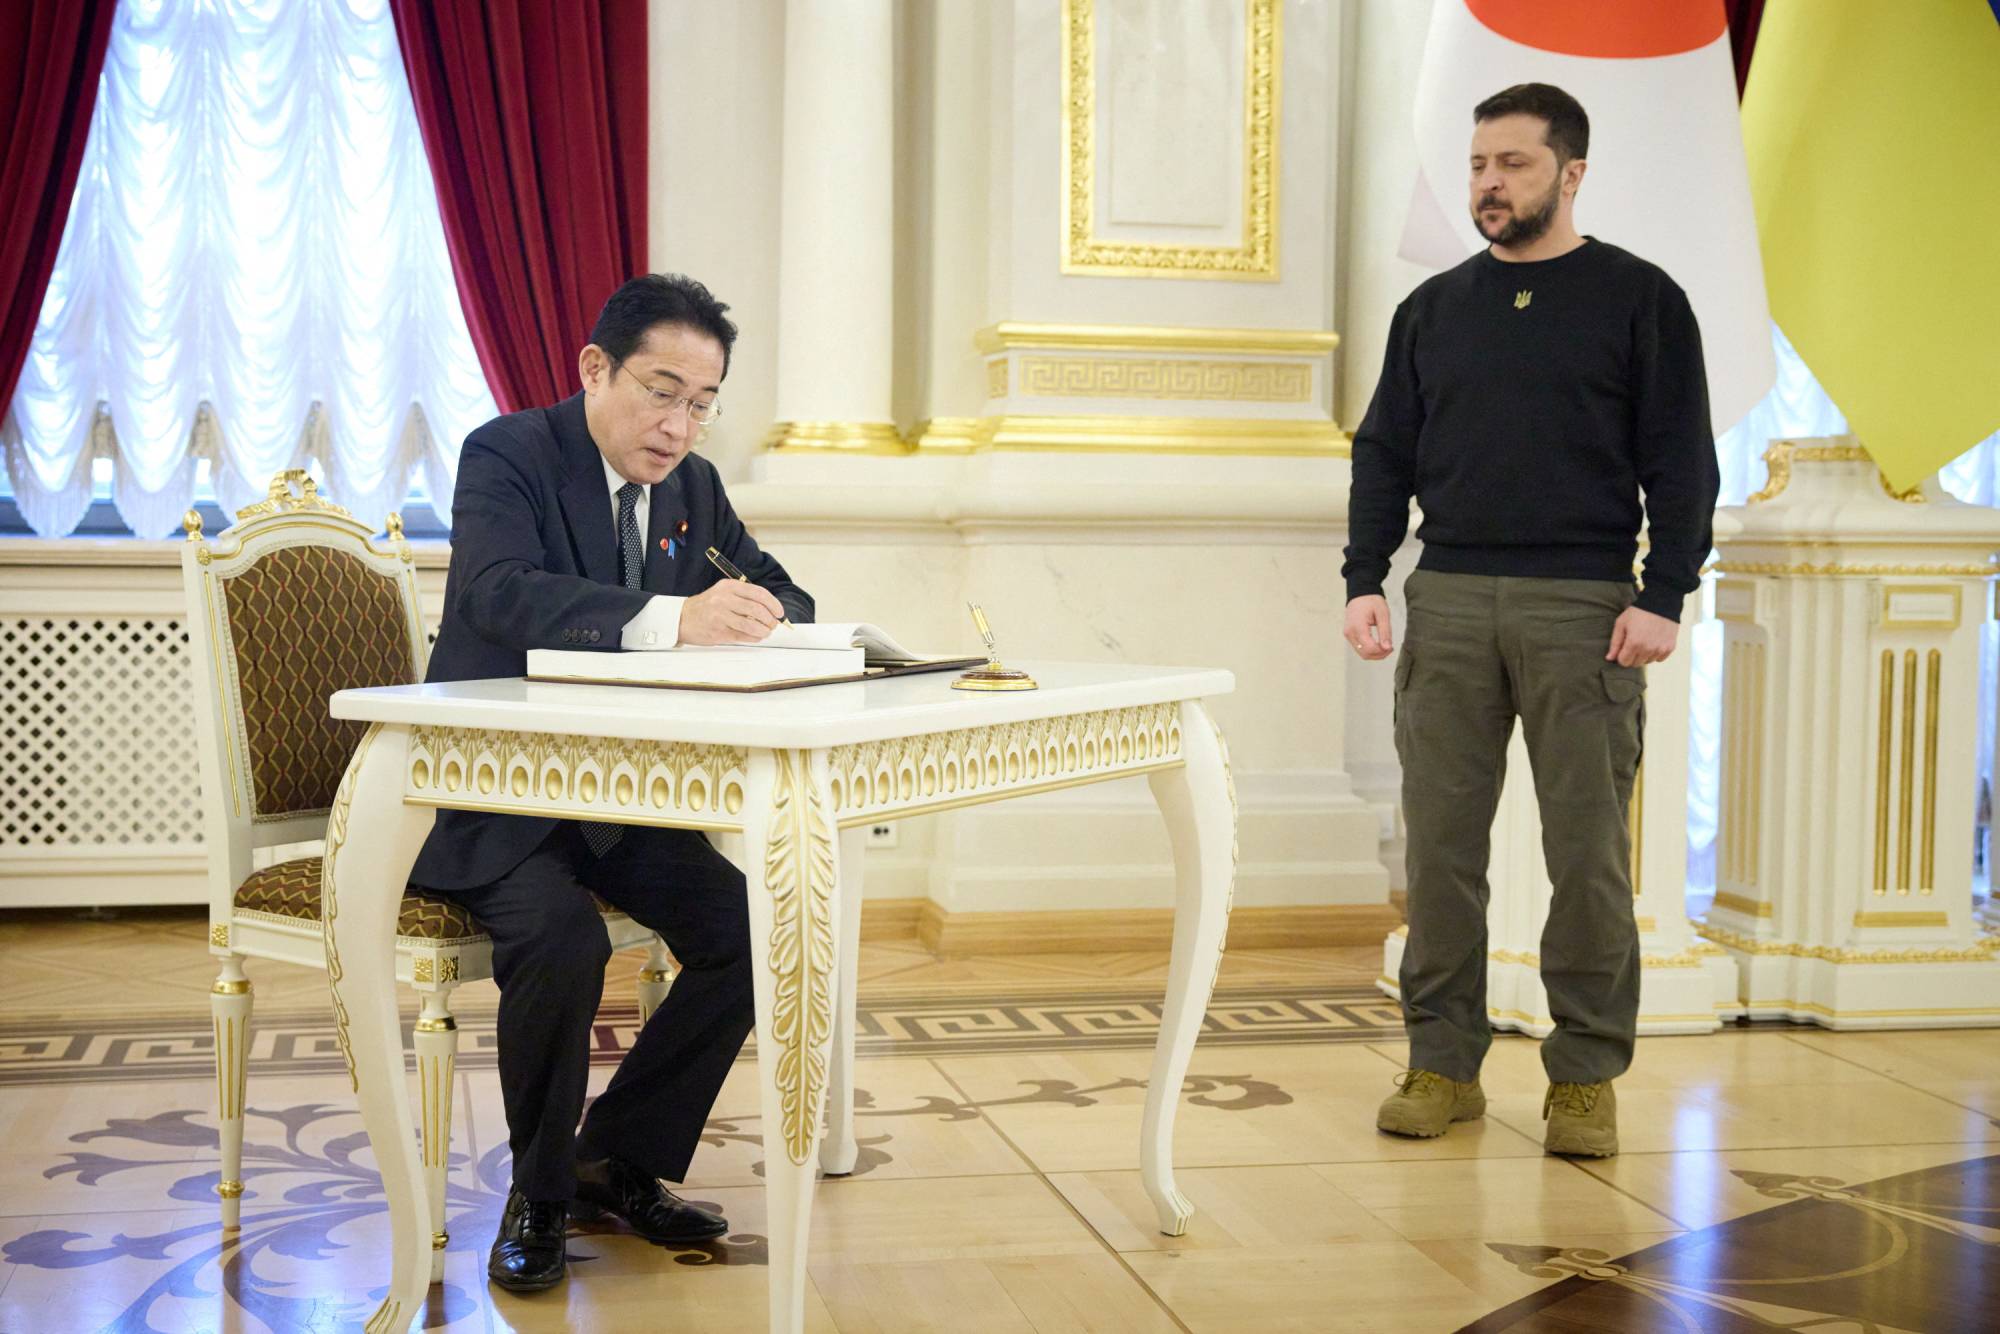 Prime Minister Fumio Kishida and Ukrainian leader Volodymyr Zelenskyy issued a joint statement upgrading bilateral ties to a “special global partnership” during the Japanese leader's visit to the war-torn country on Tuesday. | UKRAINIAN PRESIDENTIAL PRESS SERVICE / VIA REUTERS  